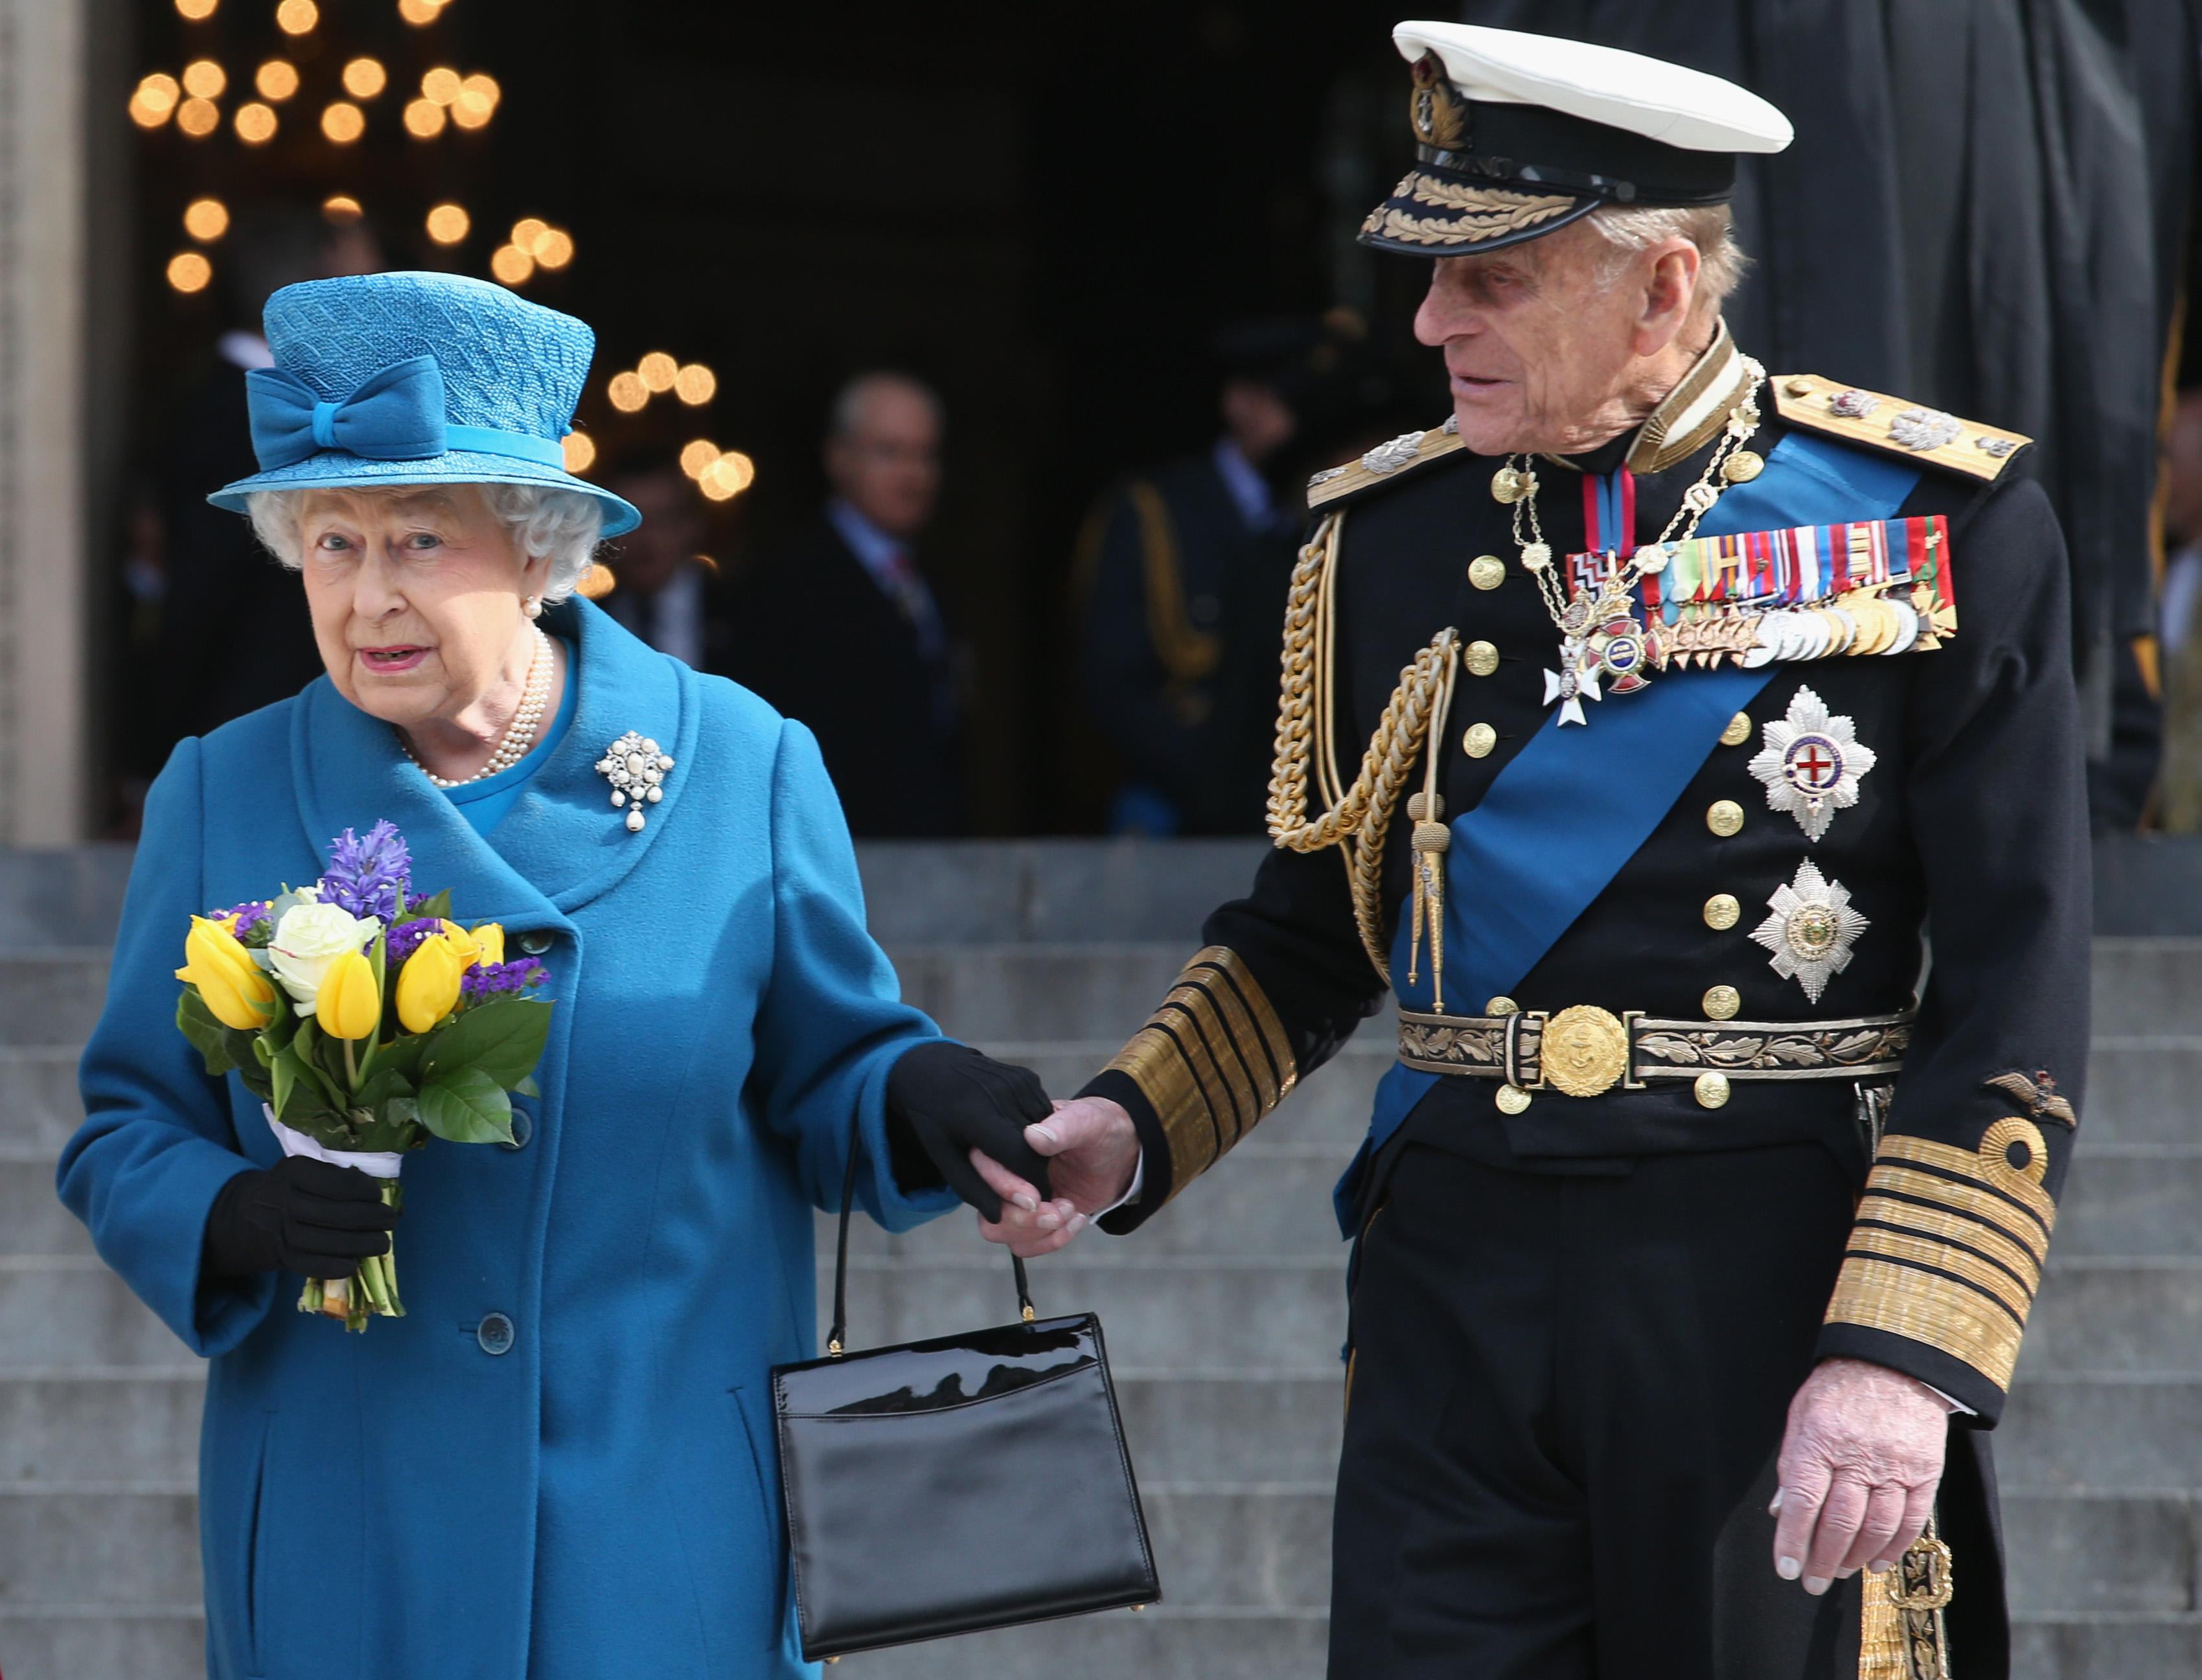 Why Does the Queen Carry Her Handbag Indoors? What's Inside?